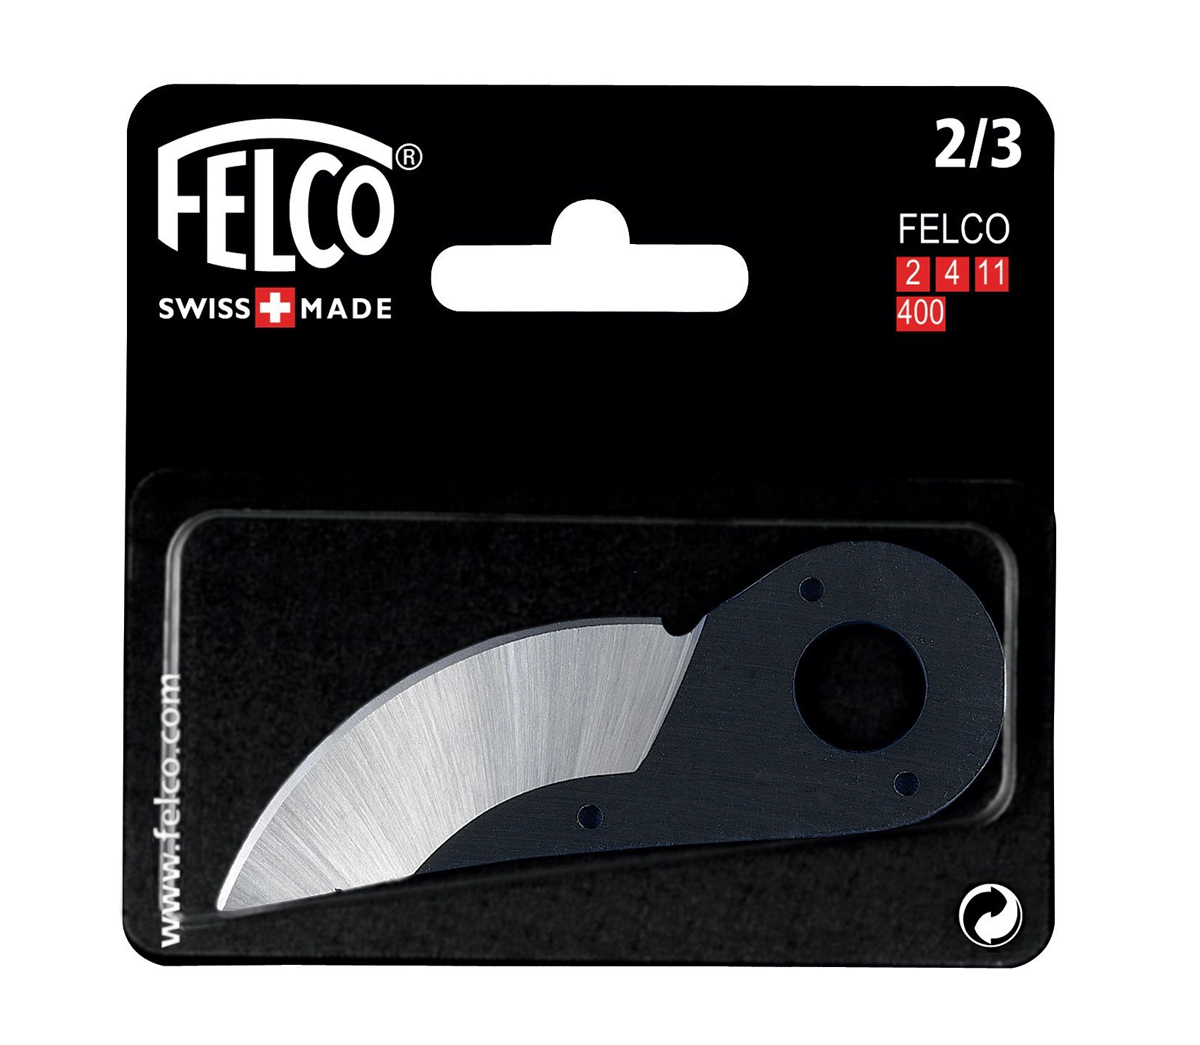 Felco 2 - 3 Cutting Blade for F 2 4 11 - Knives, Pruners, & Shears